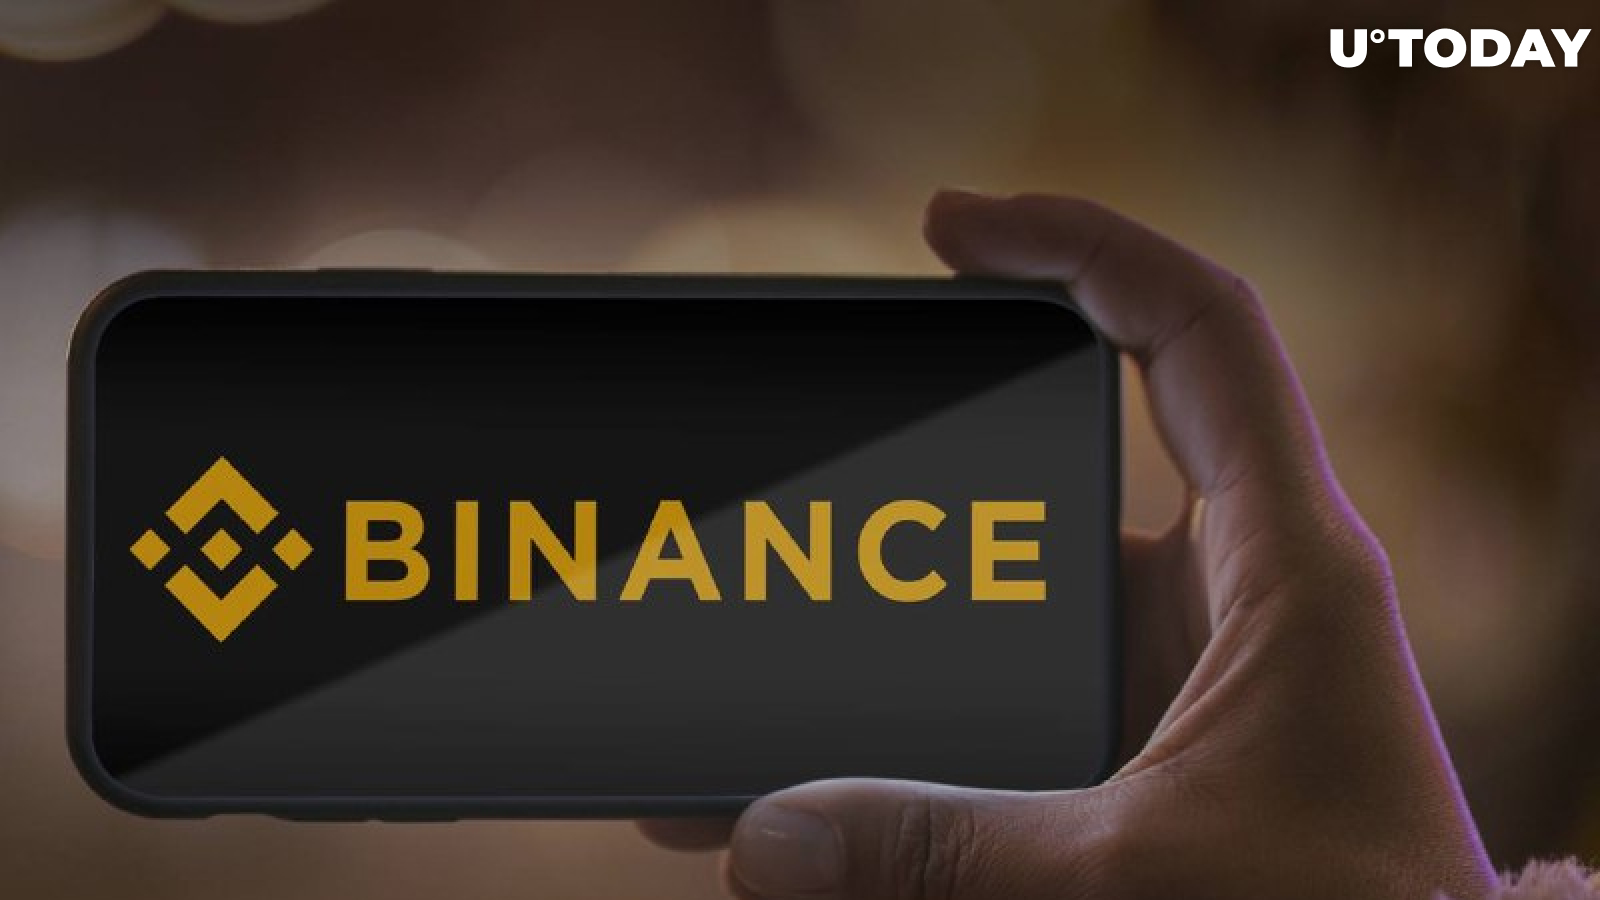 Binance Plans to Hire 2,000 New Employees Against Coinbase & Gemini Layoffs and SEC Investigation